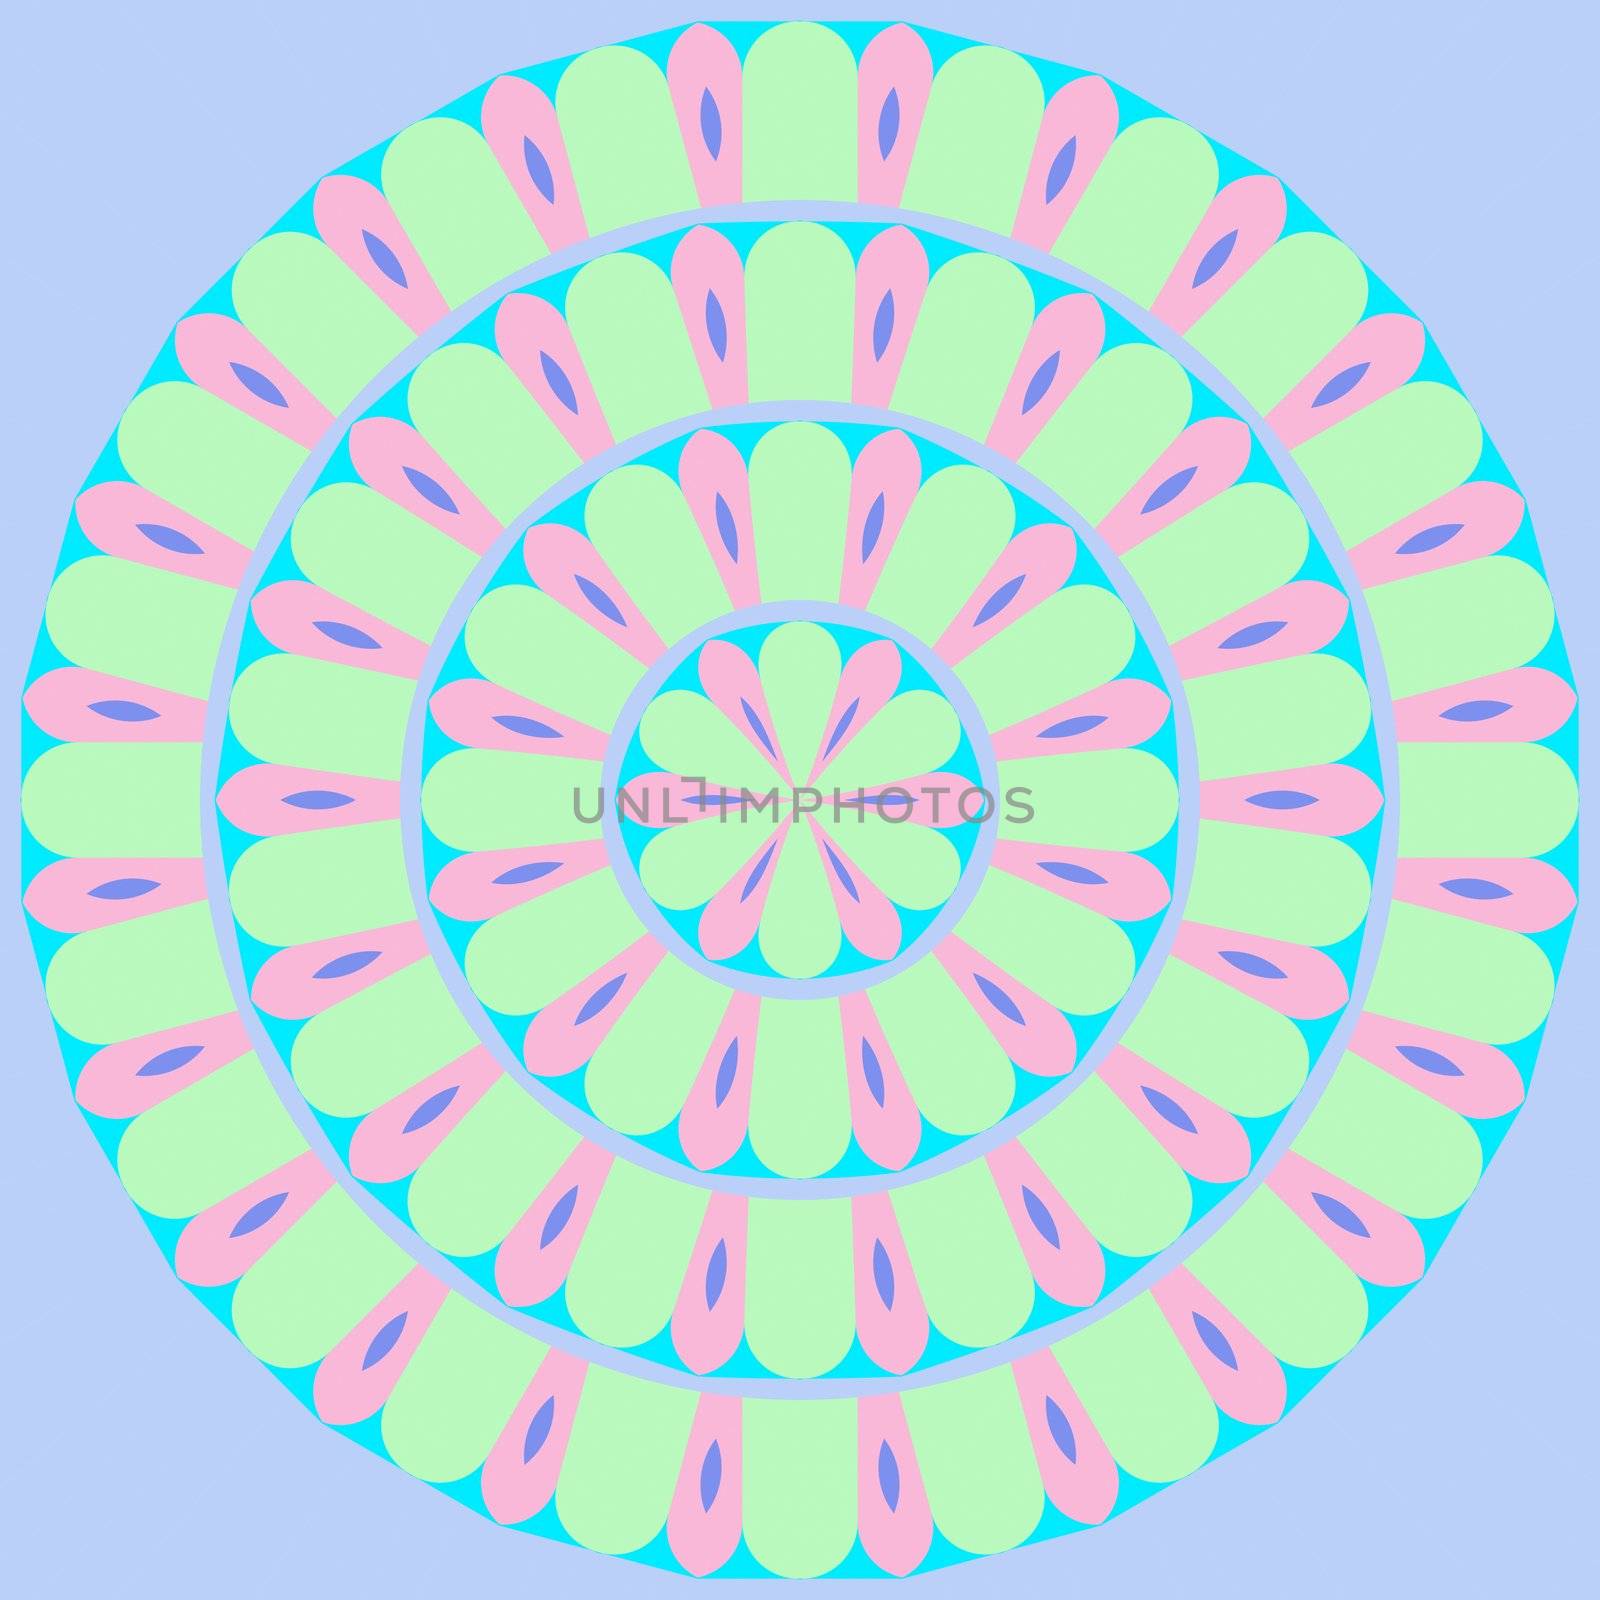  flower like mandala symbol in soft pink, blue and green colors